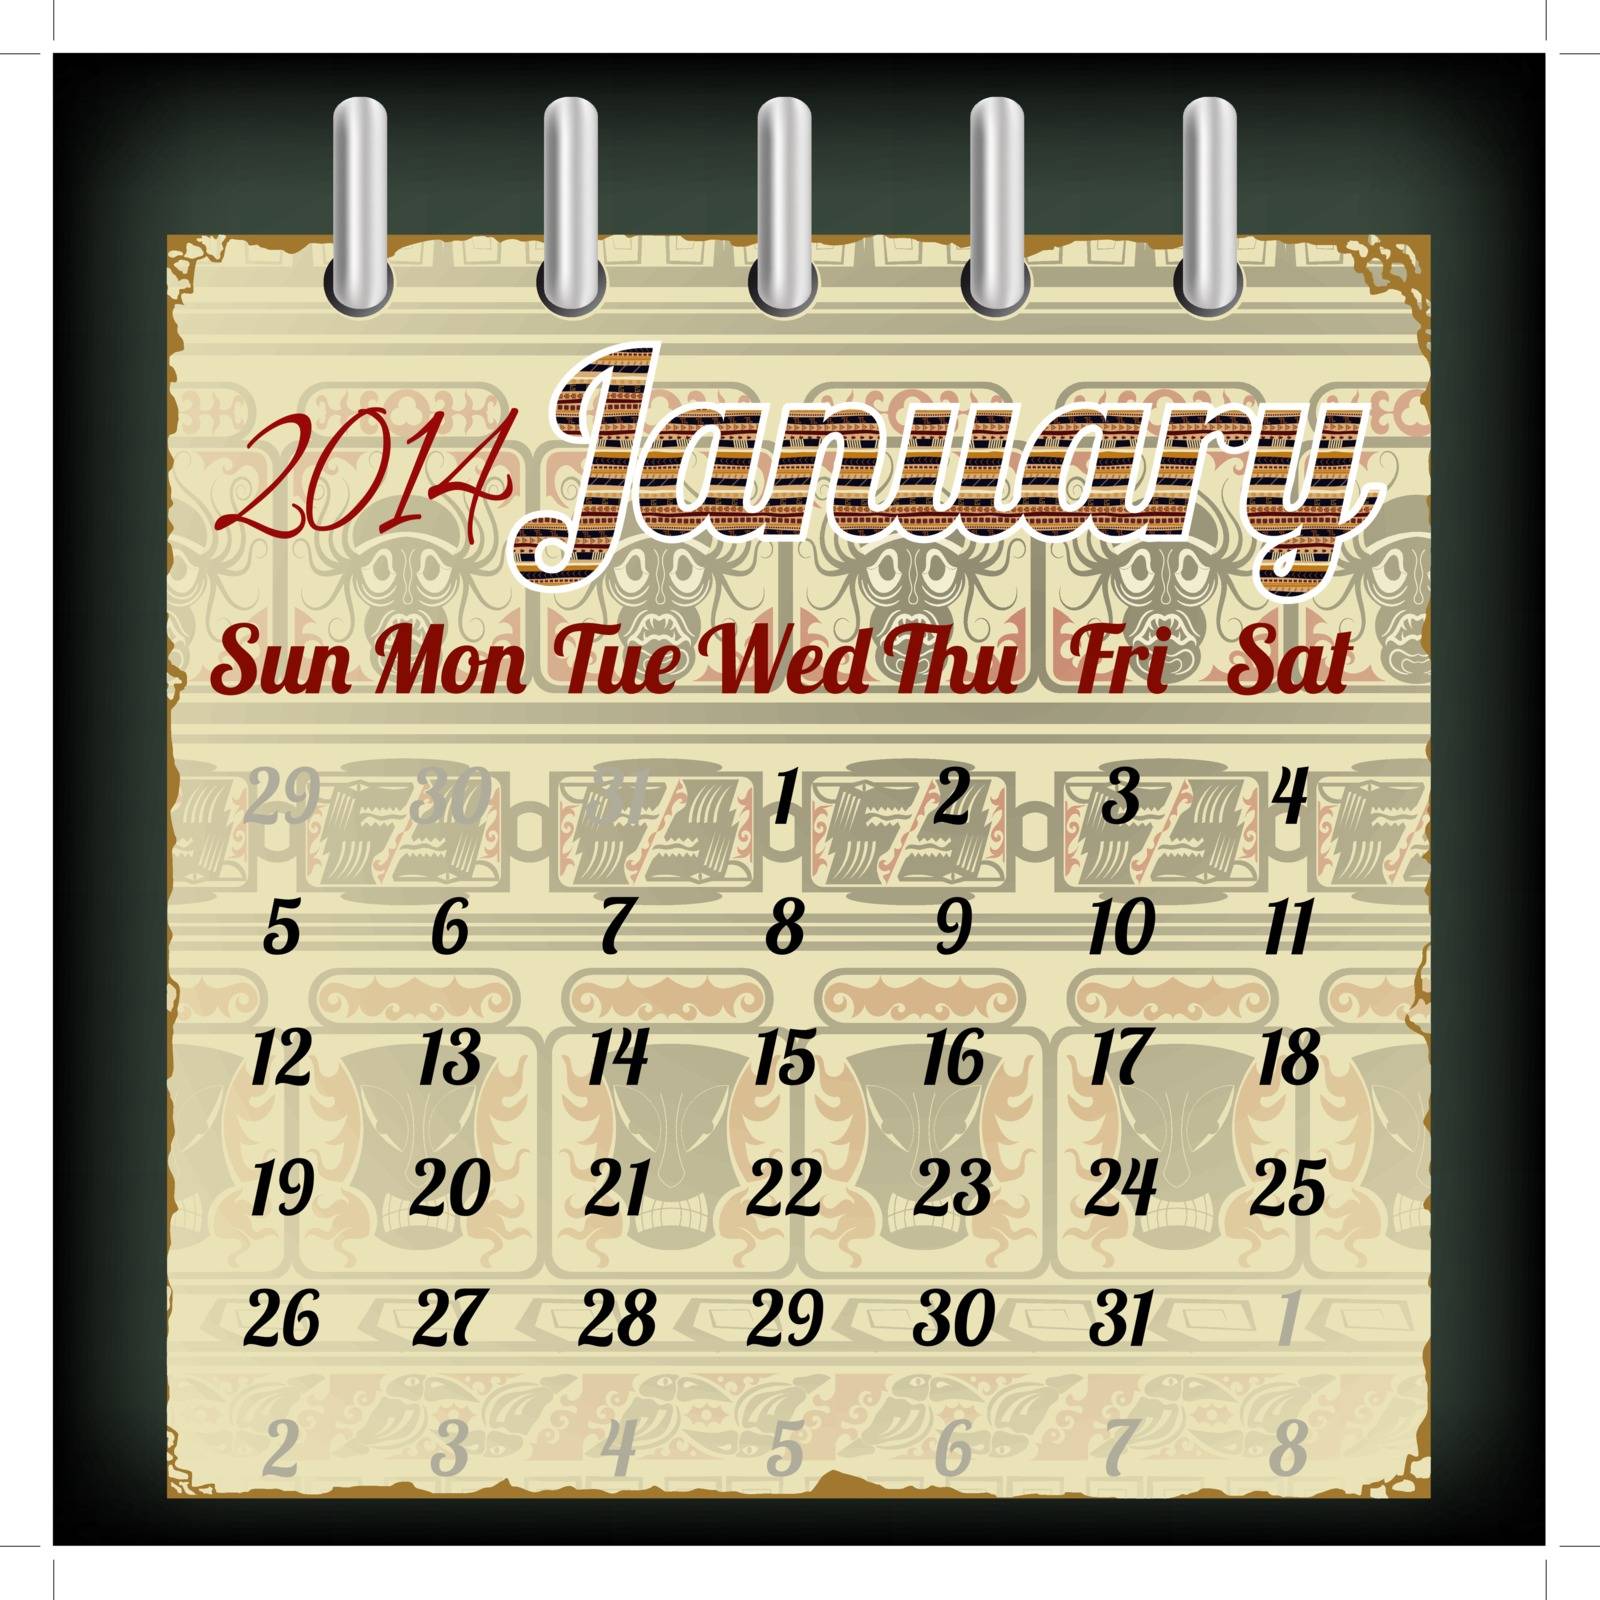 Calendar for January 2014 with an African 
background
